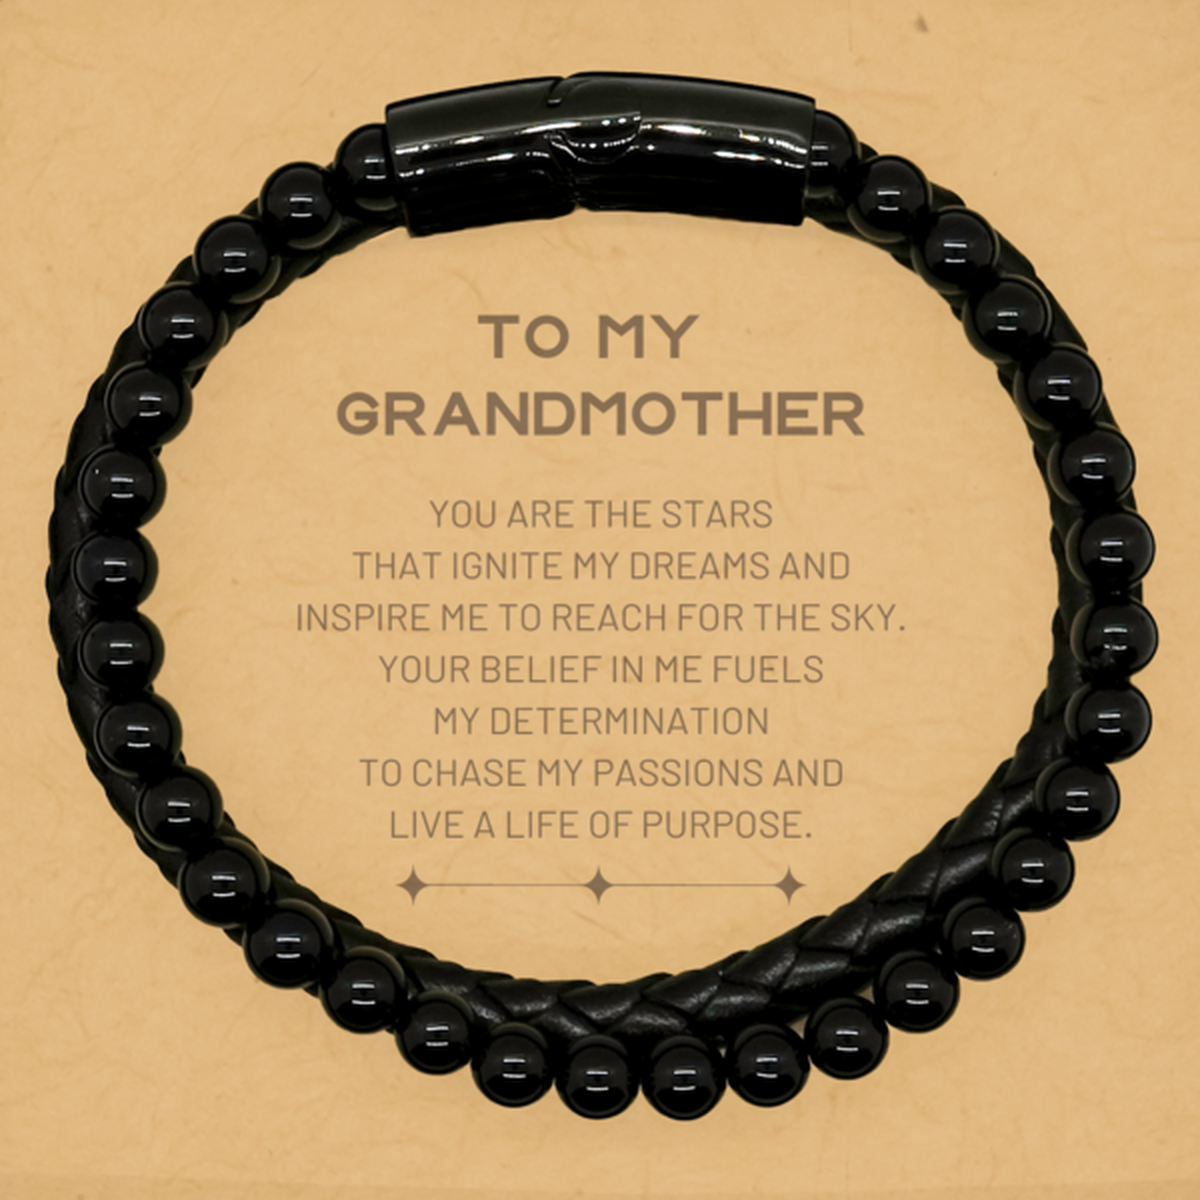 To My Grandmother Stone Leather Bracelets, You are the stars that ignite my dreams and inspire me to reach for the sky, Birthday Unique Gifts For Grandmother, Thank You Gifts For Grandmother